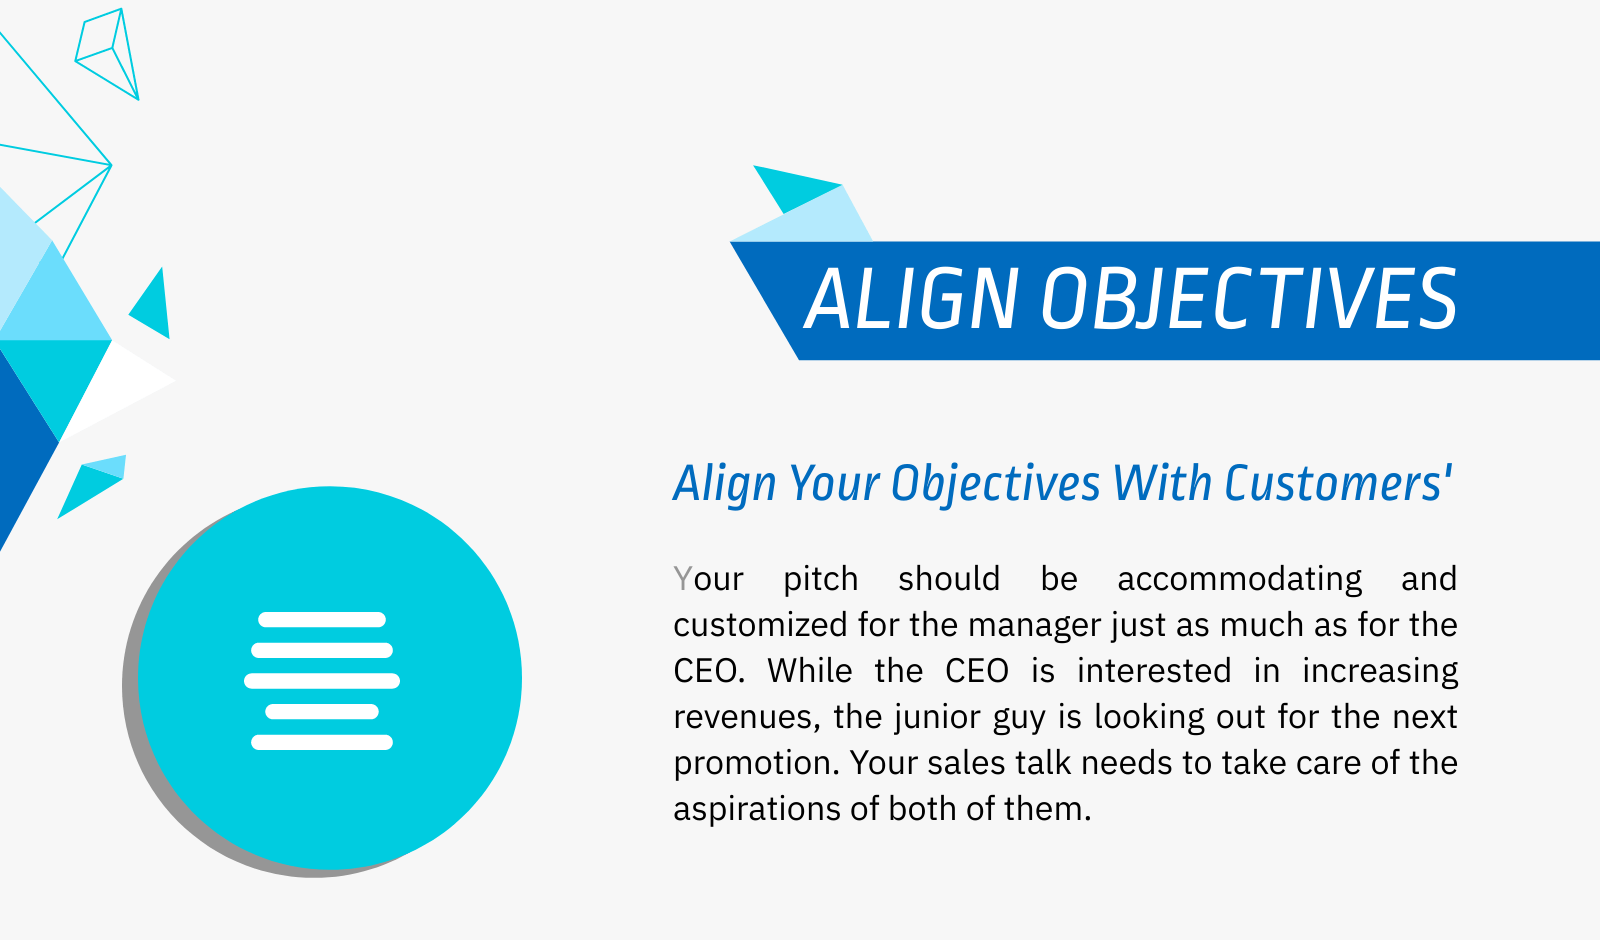 Align your objectives